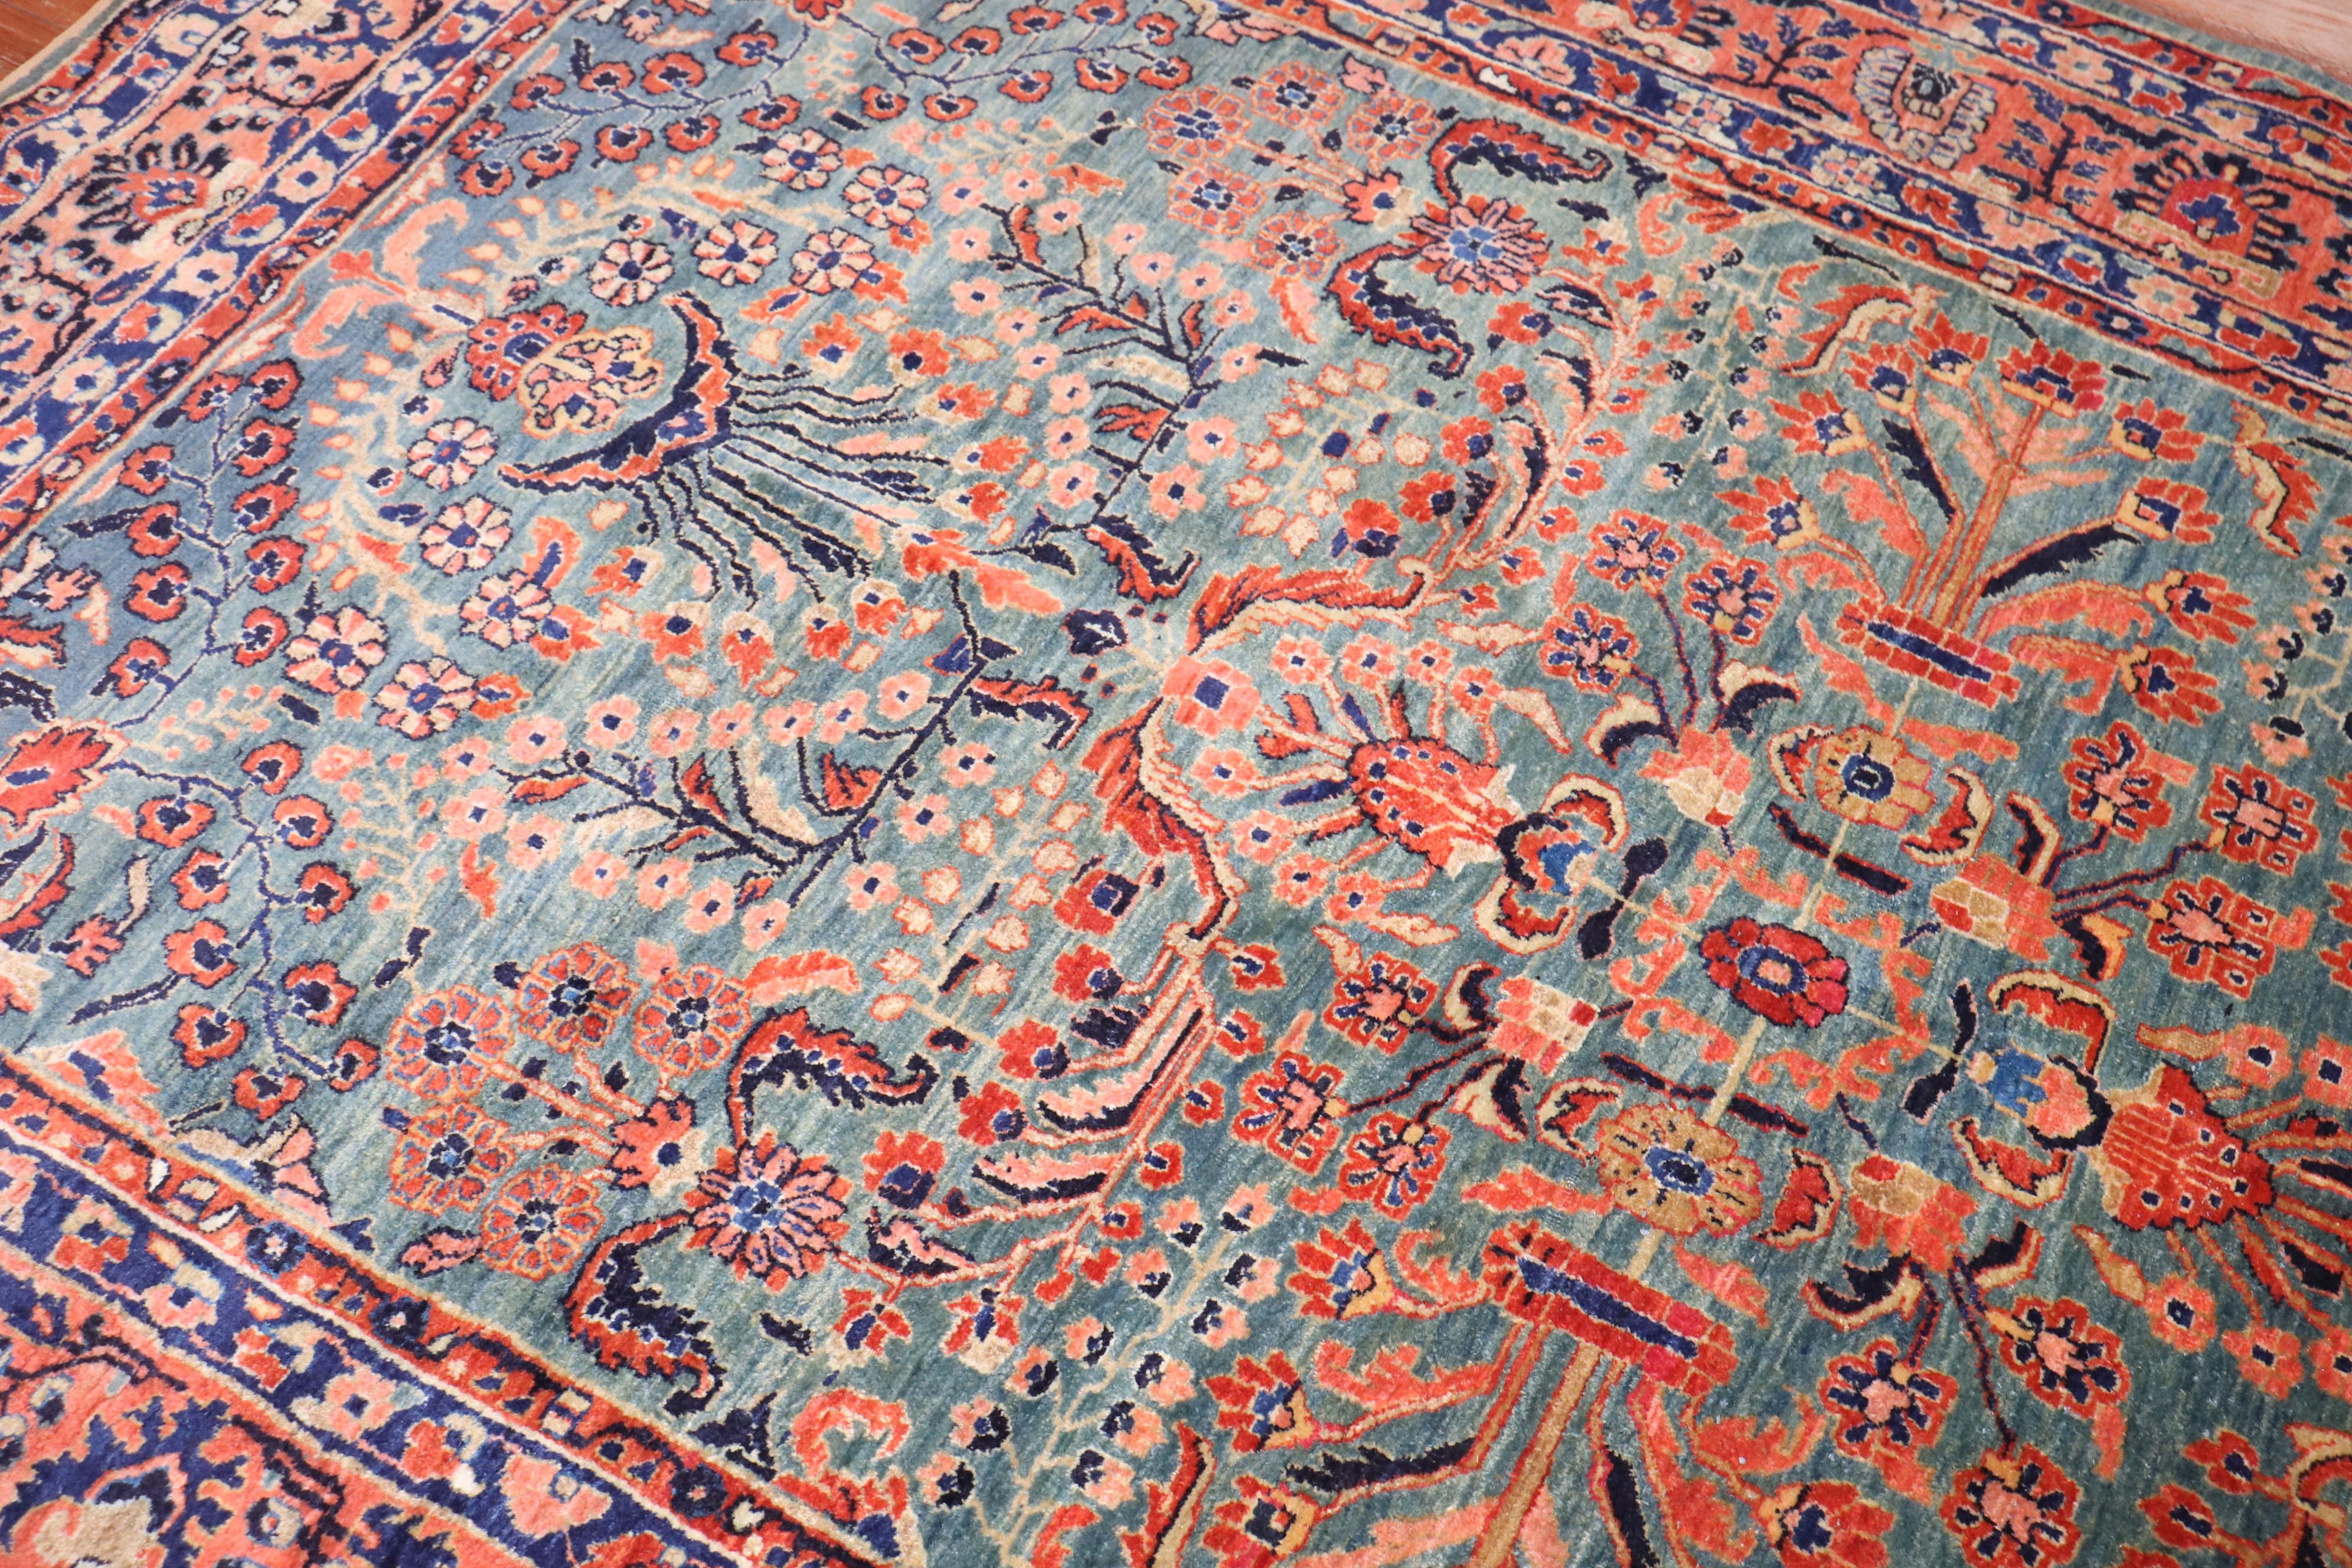 an early 20th Century Persian Sarouk Intermediate Rug with a rich emerald green field

Details
rug no.	j3696

size	5' 11